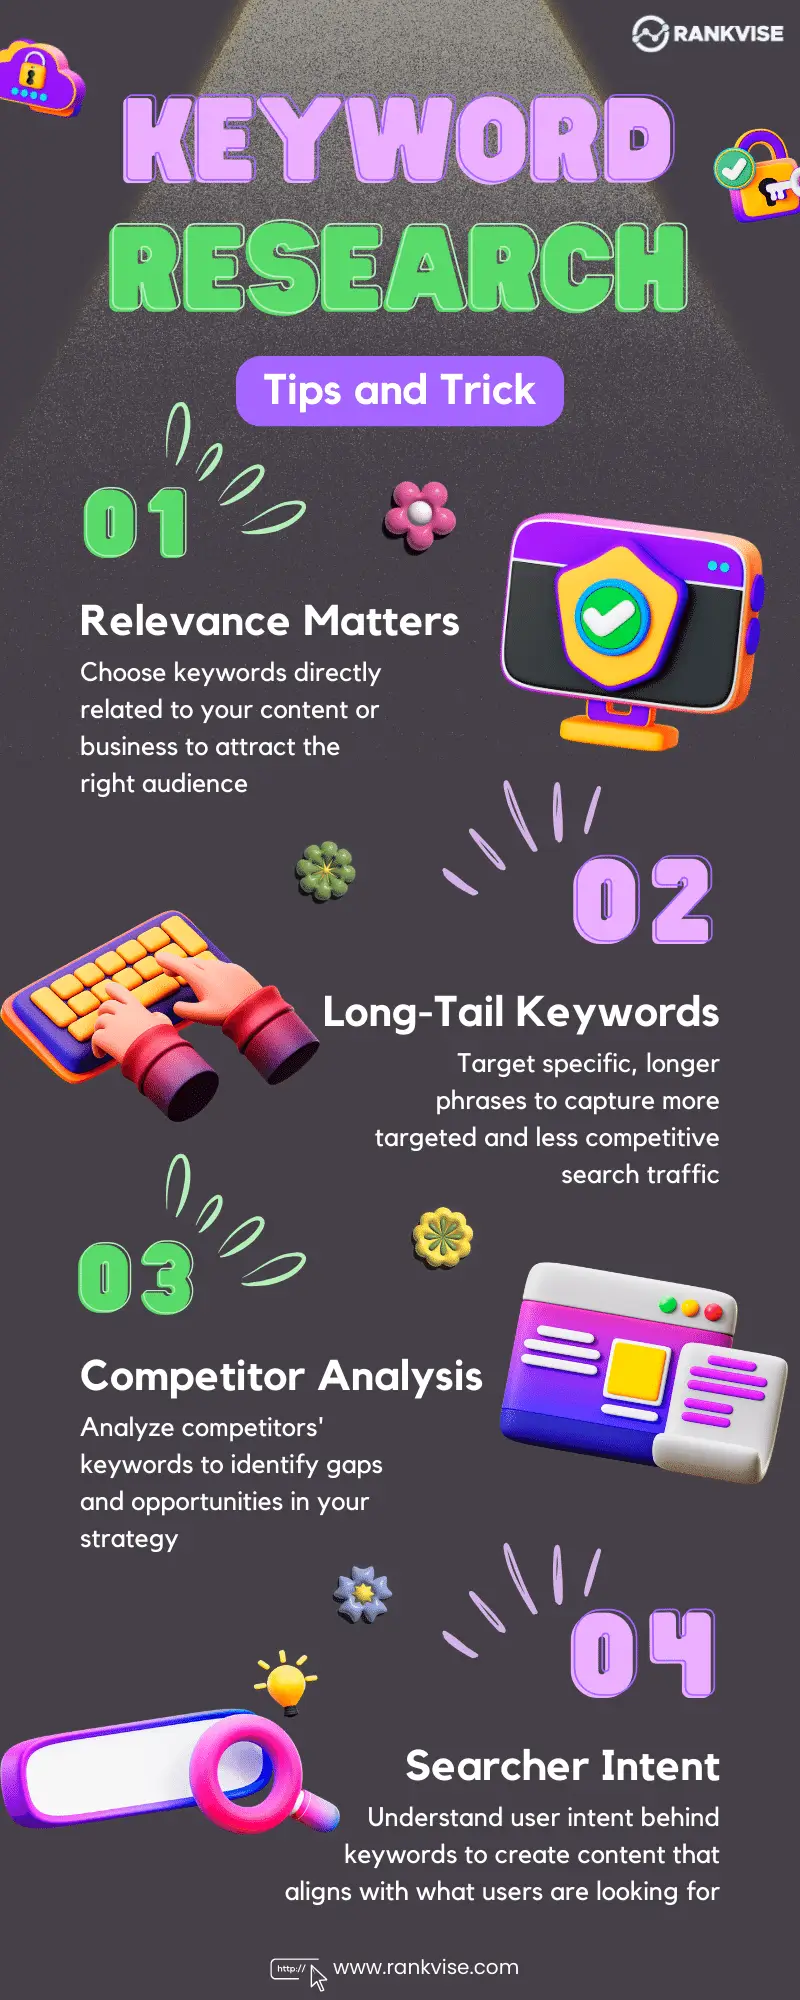 Keyword Research SEO Tips and Trick Infographic